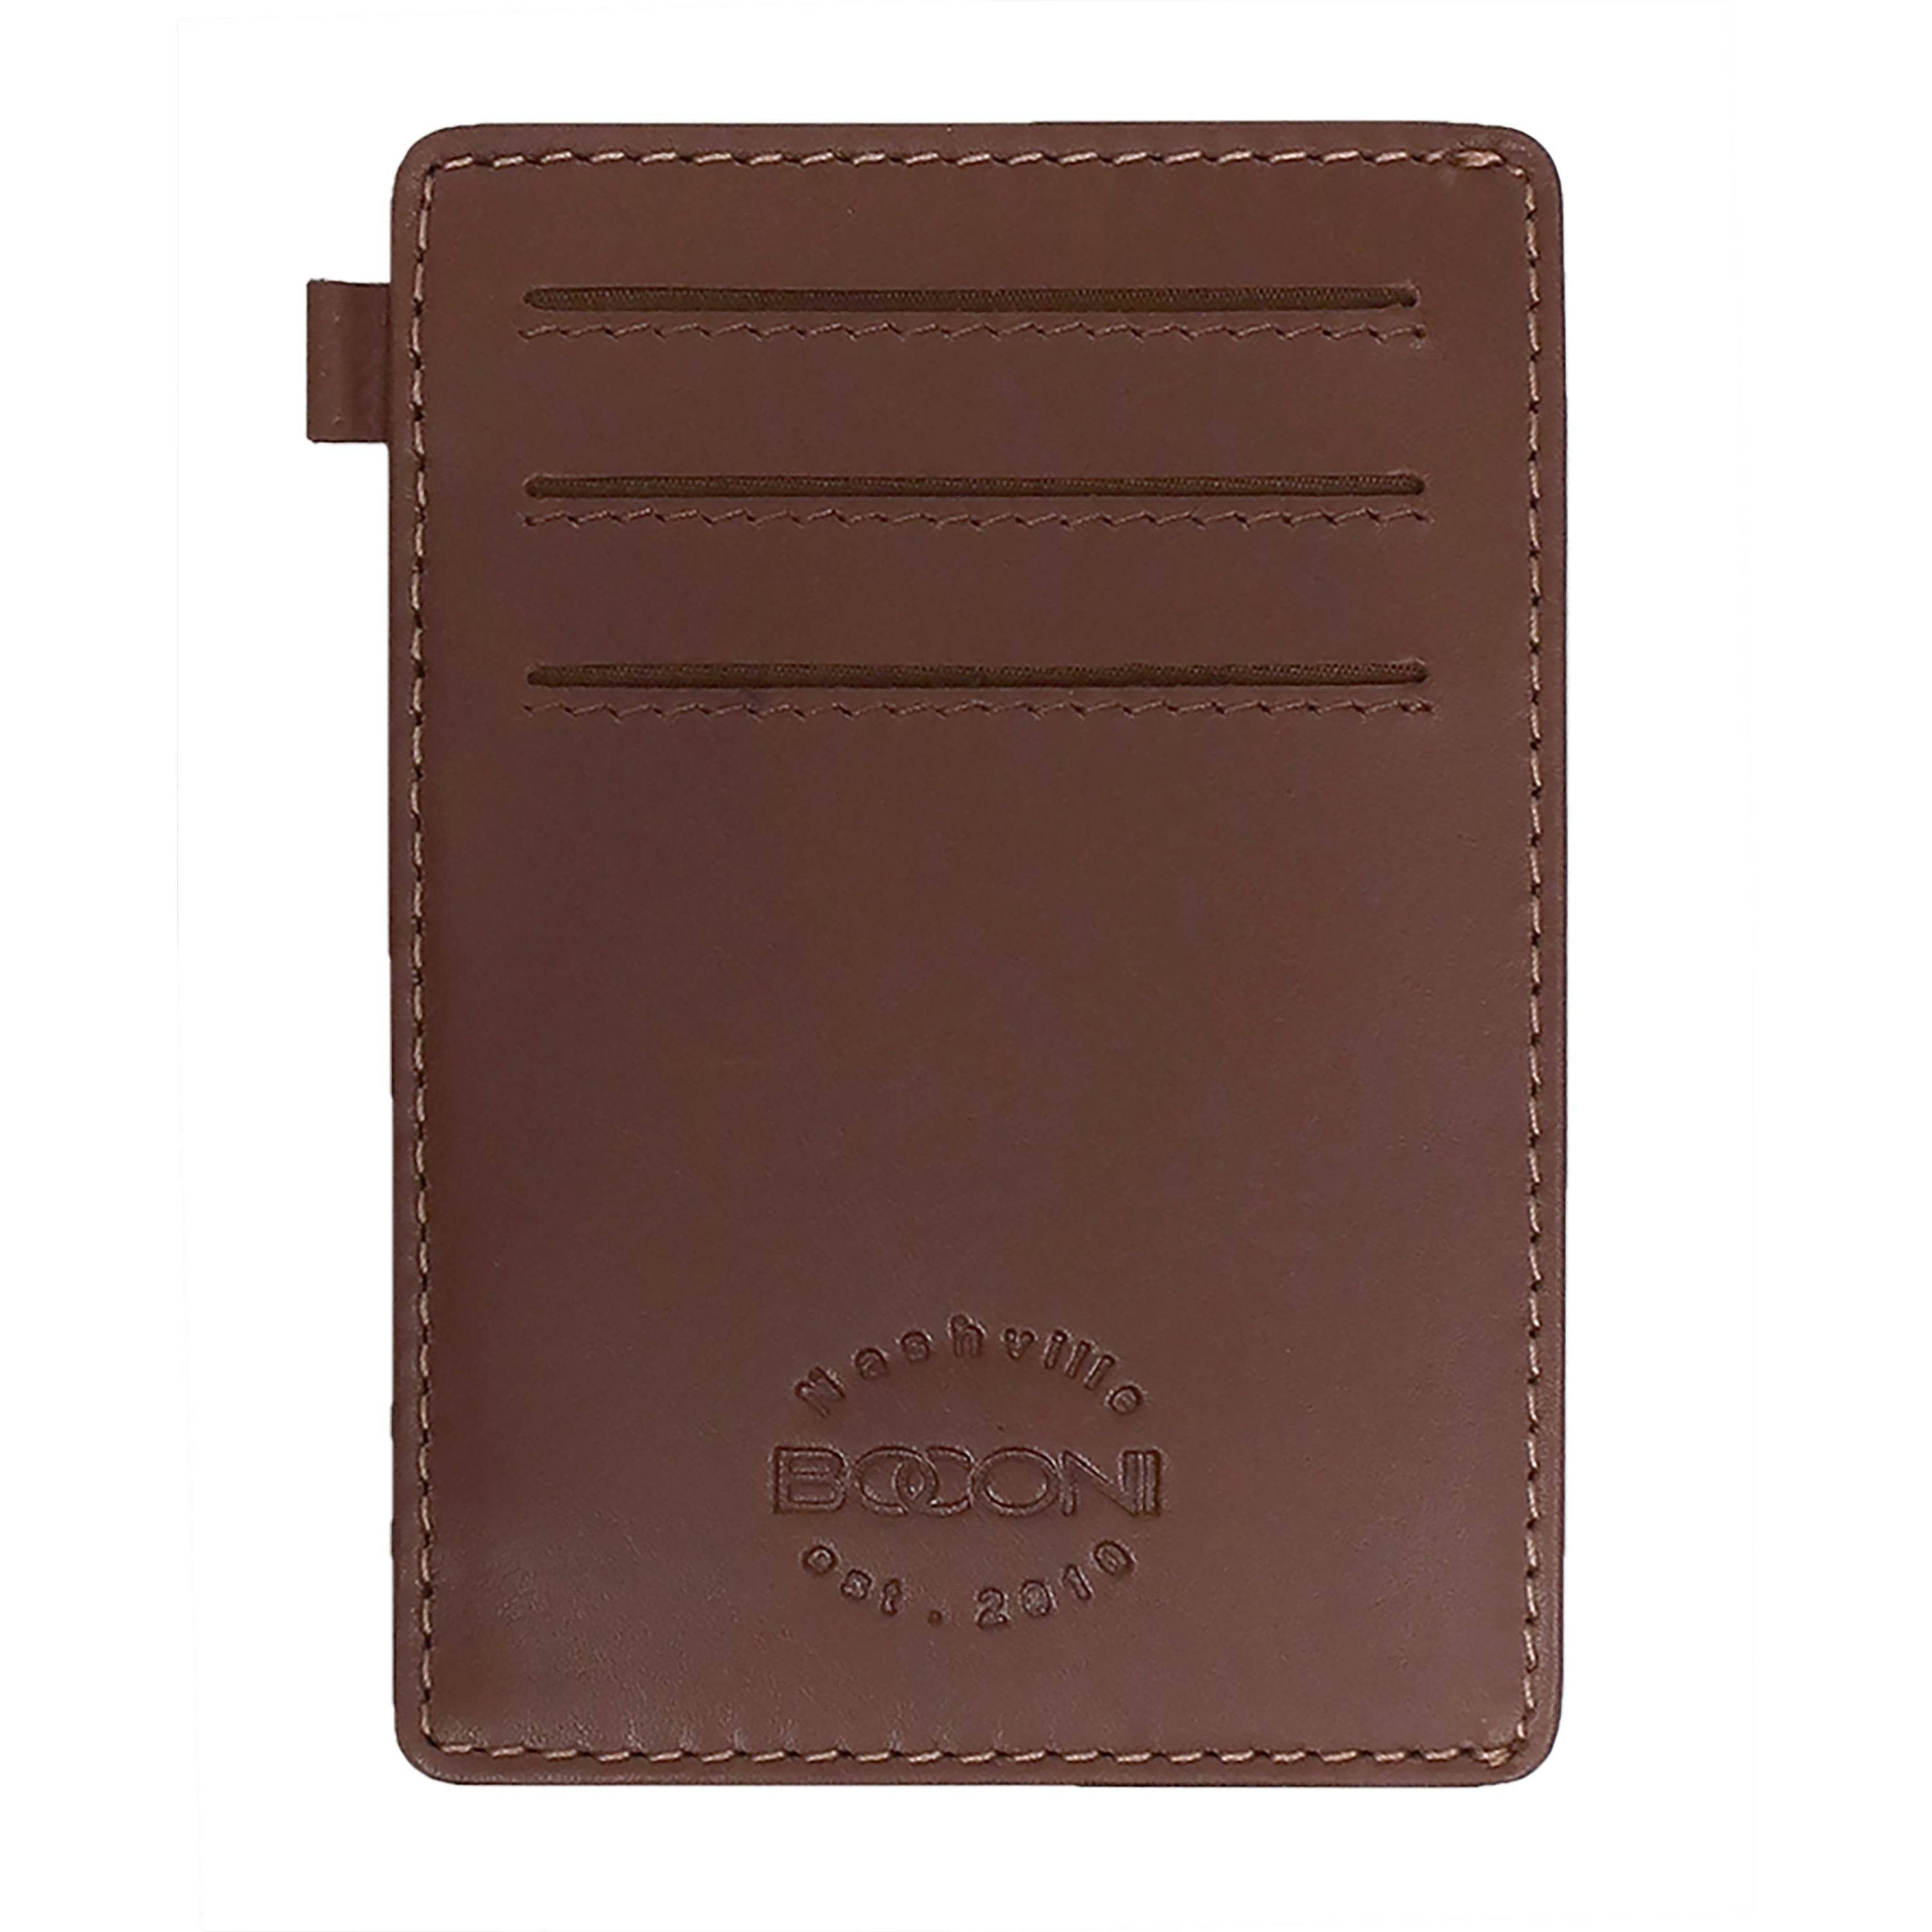 a brown leather card case with a logo on it